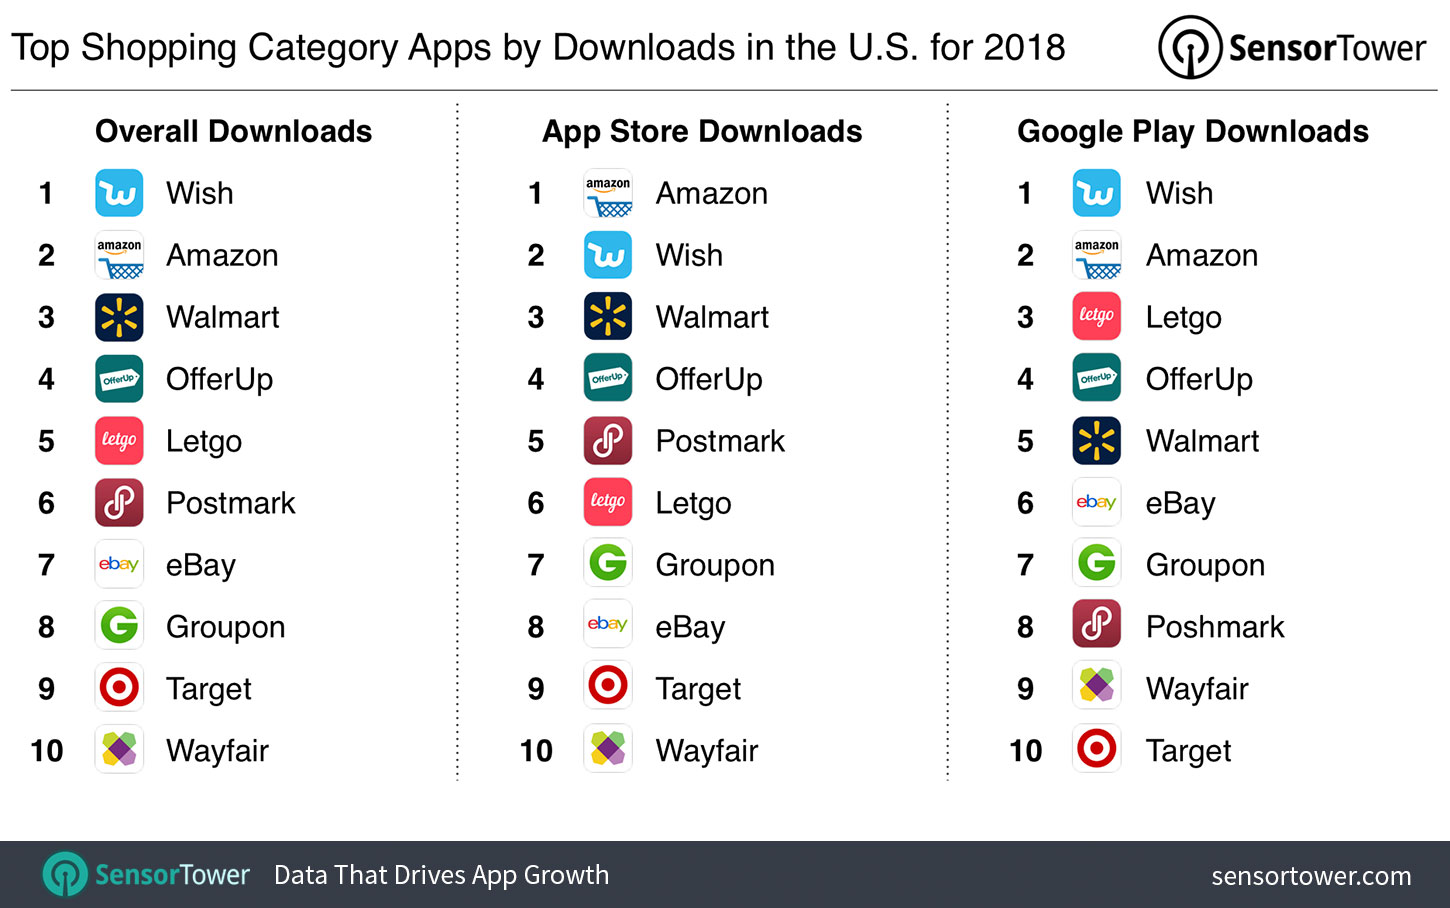 Top Shopping Category Apps by Downloads in the U.S. for 2018